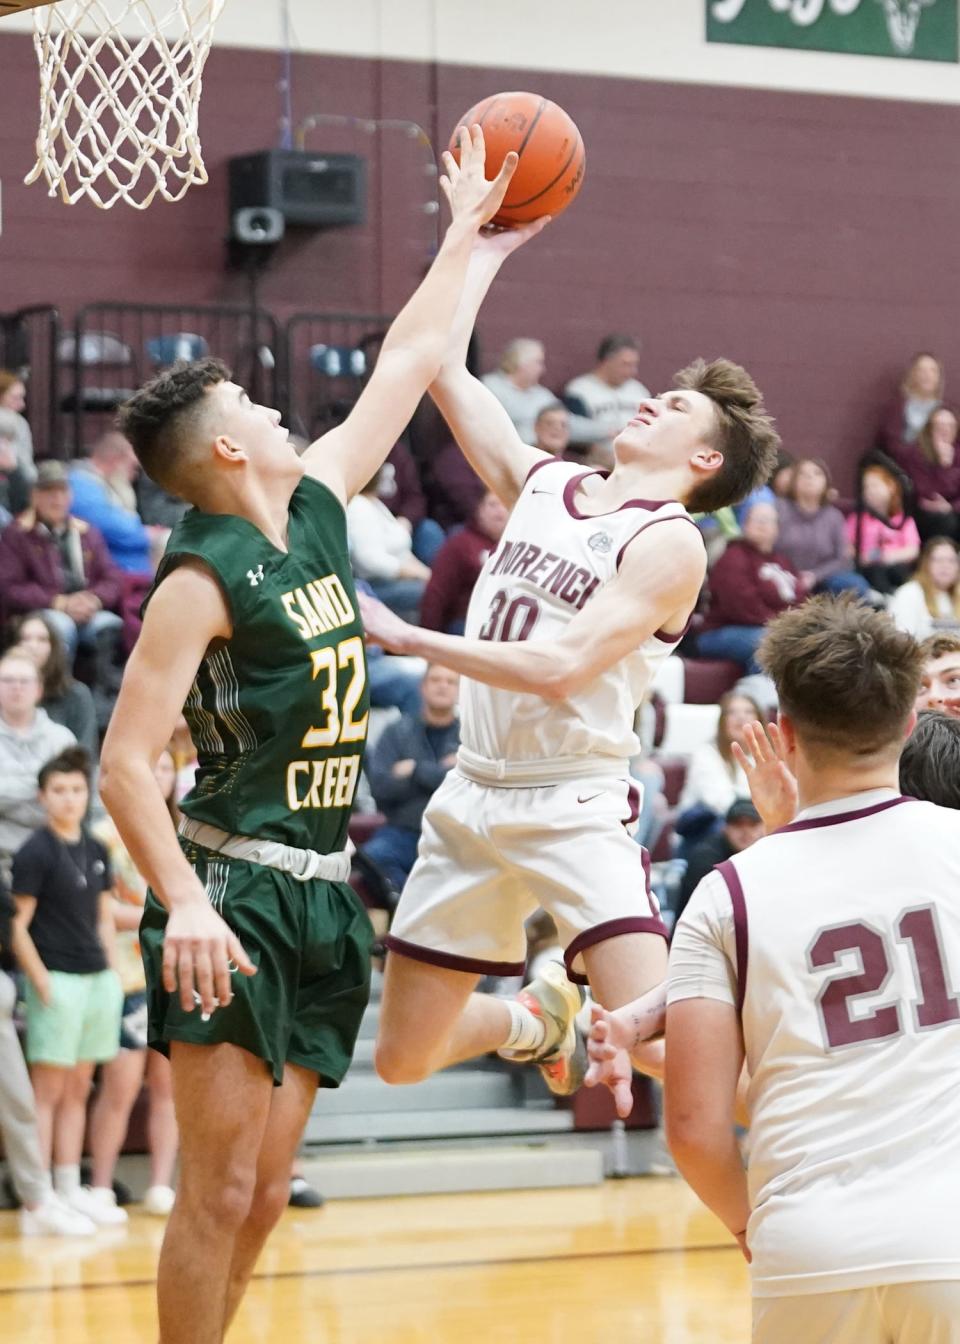 Sand Creek's Trevor Opel defends while Morenci's Bryson Bachelder goes up for a shot last season.